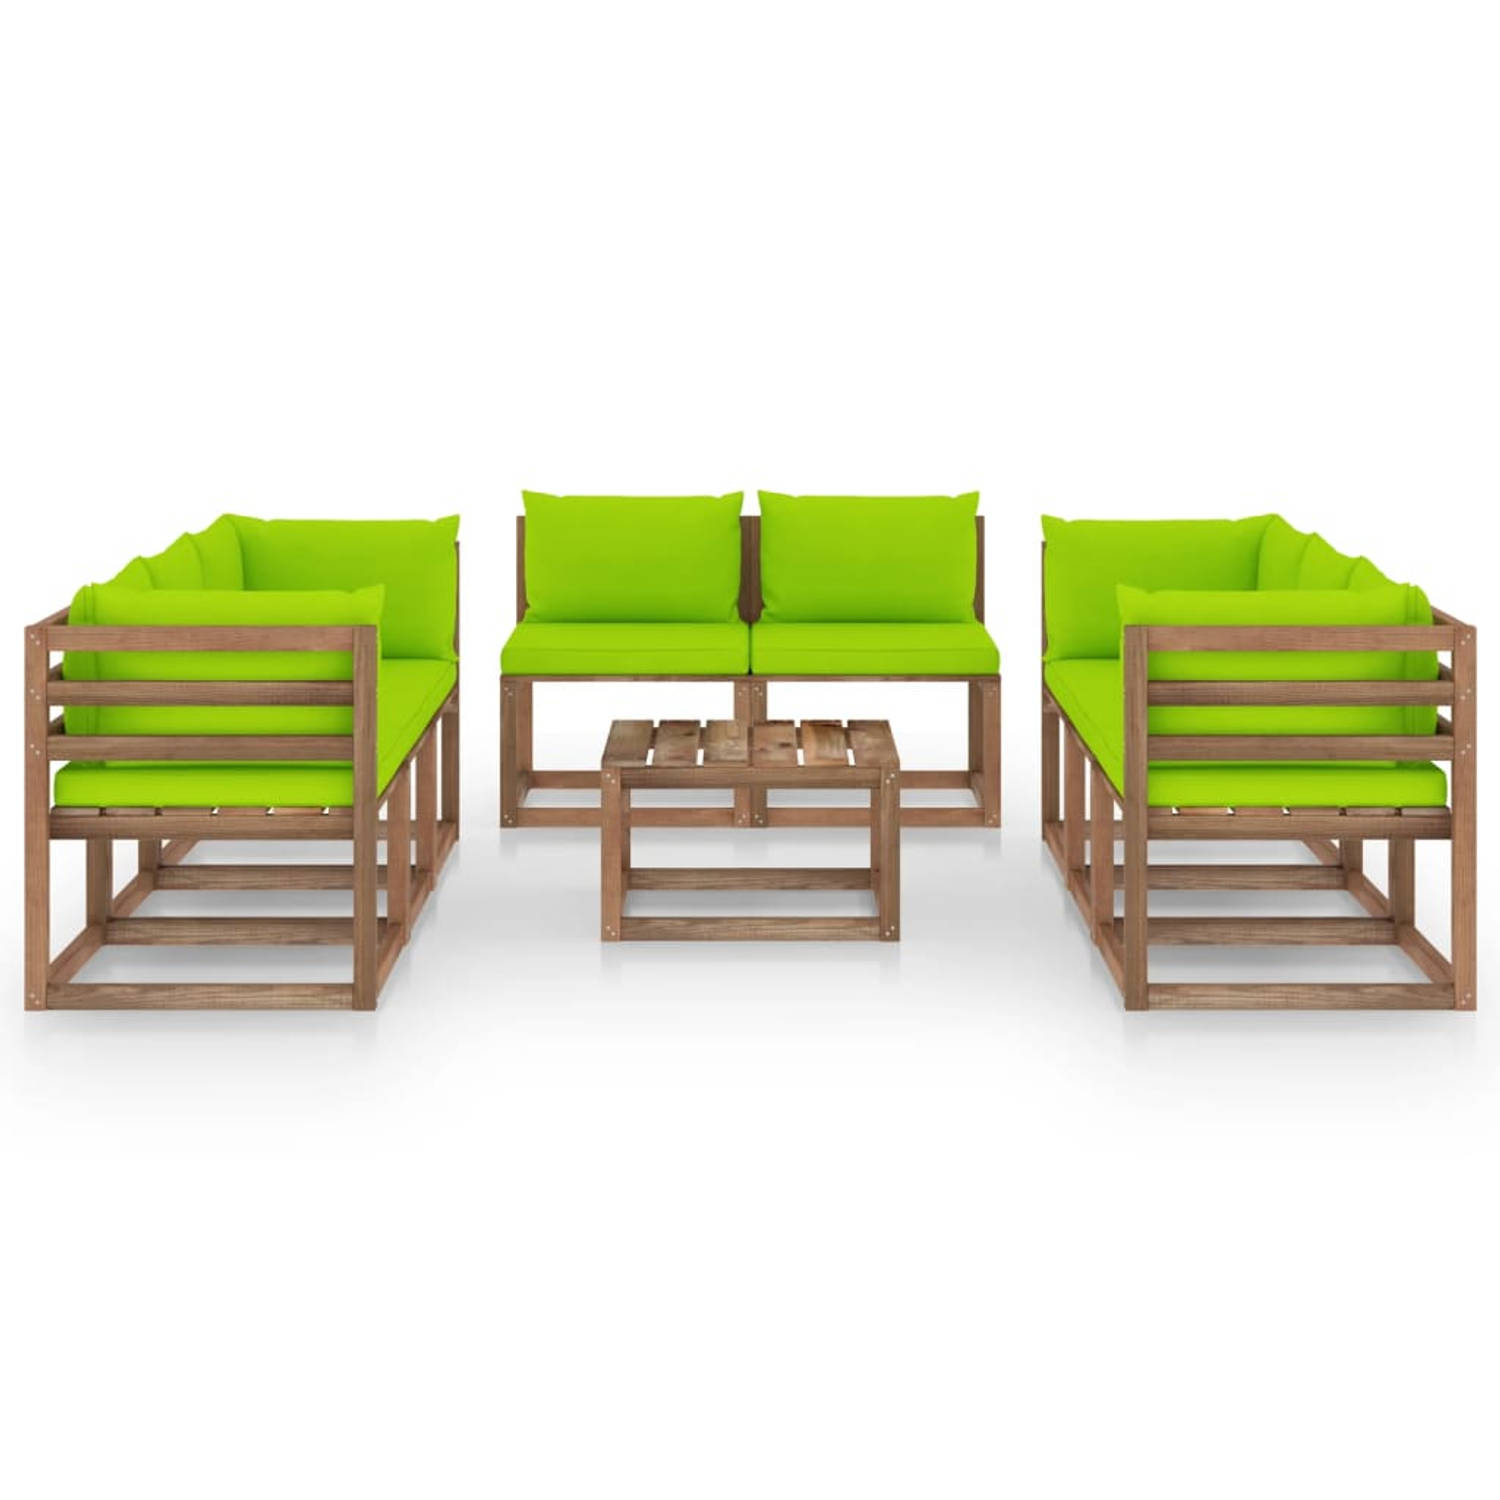 The Living Store Lounge Tuinset - Grenenhout - Helder Groen - 60x60x36.5cm - Modulair